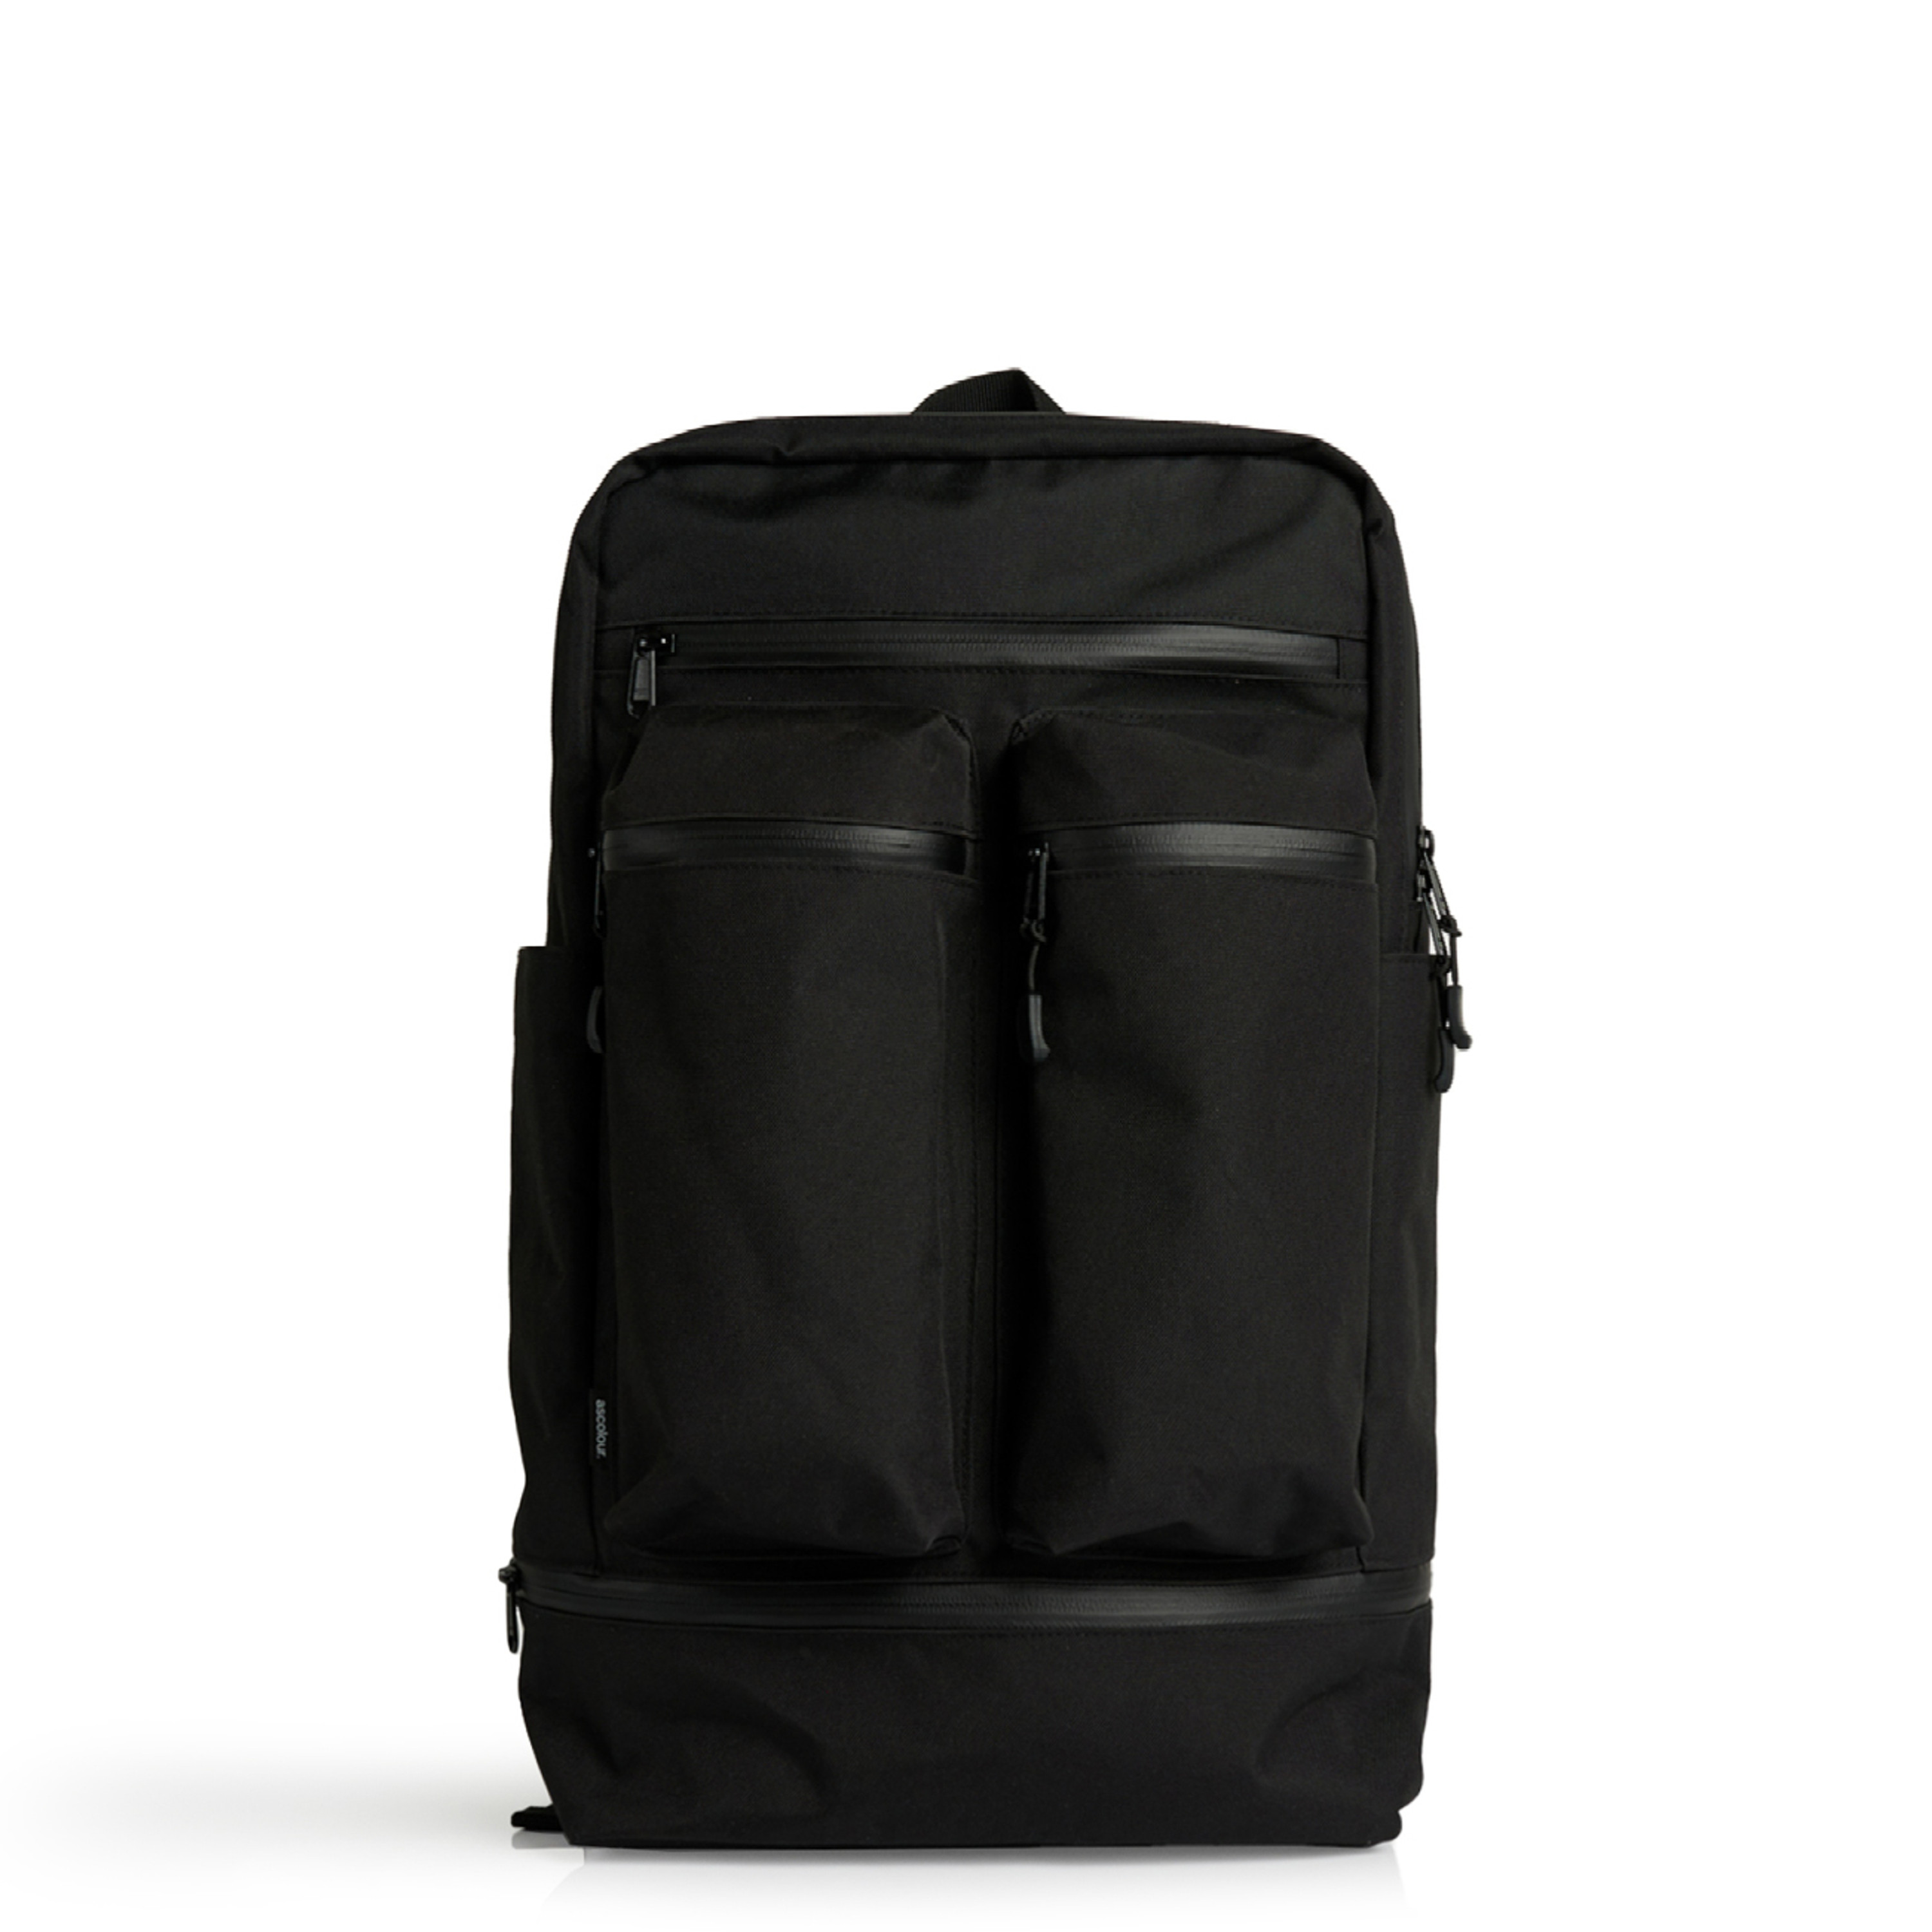 Recycled Travel Backpack - 1030